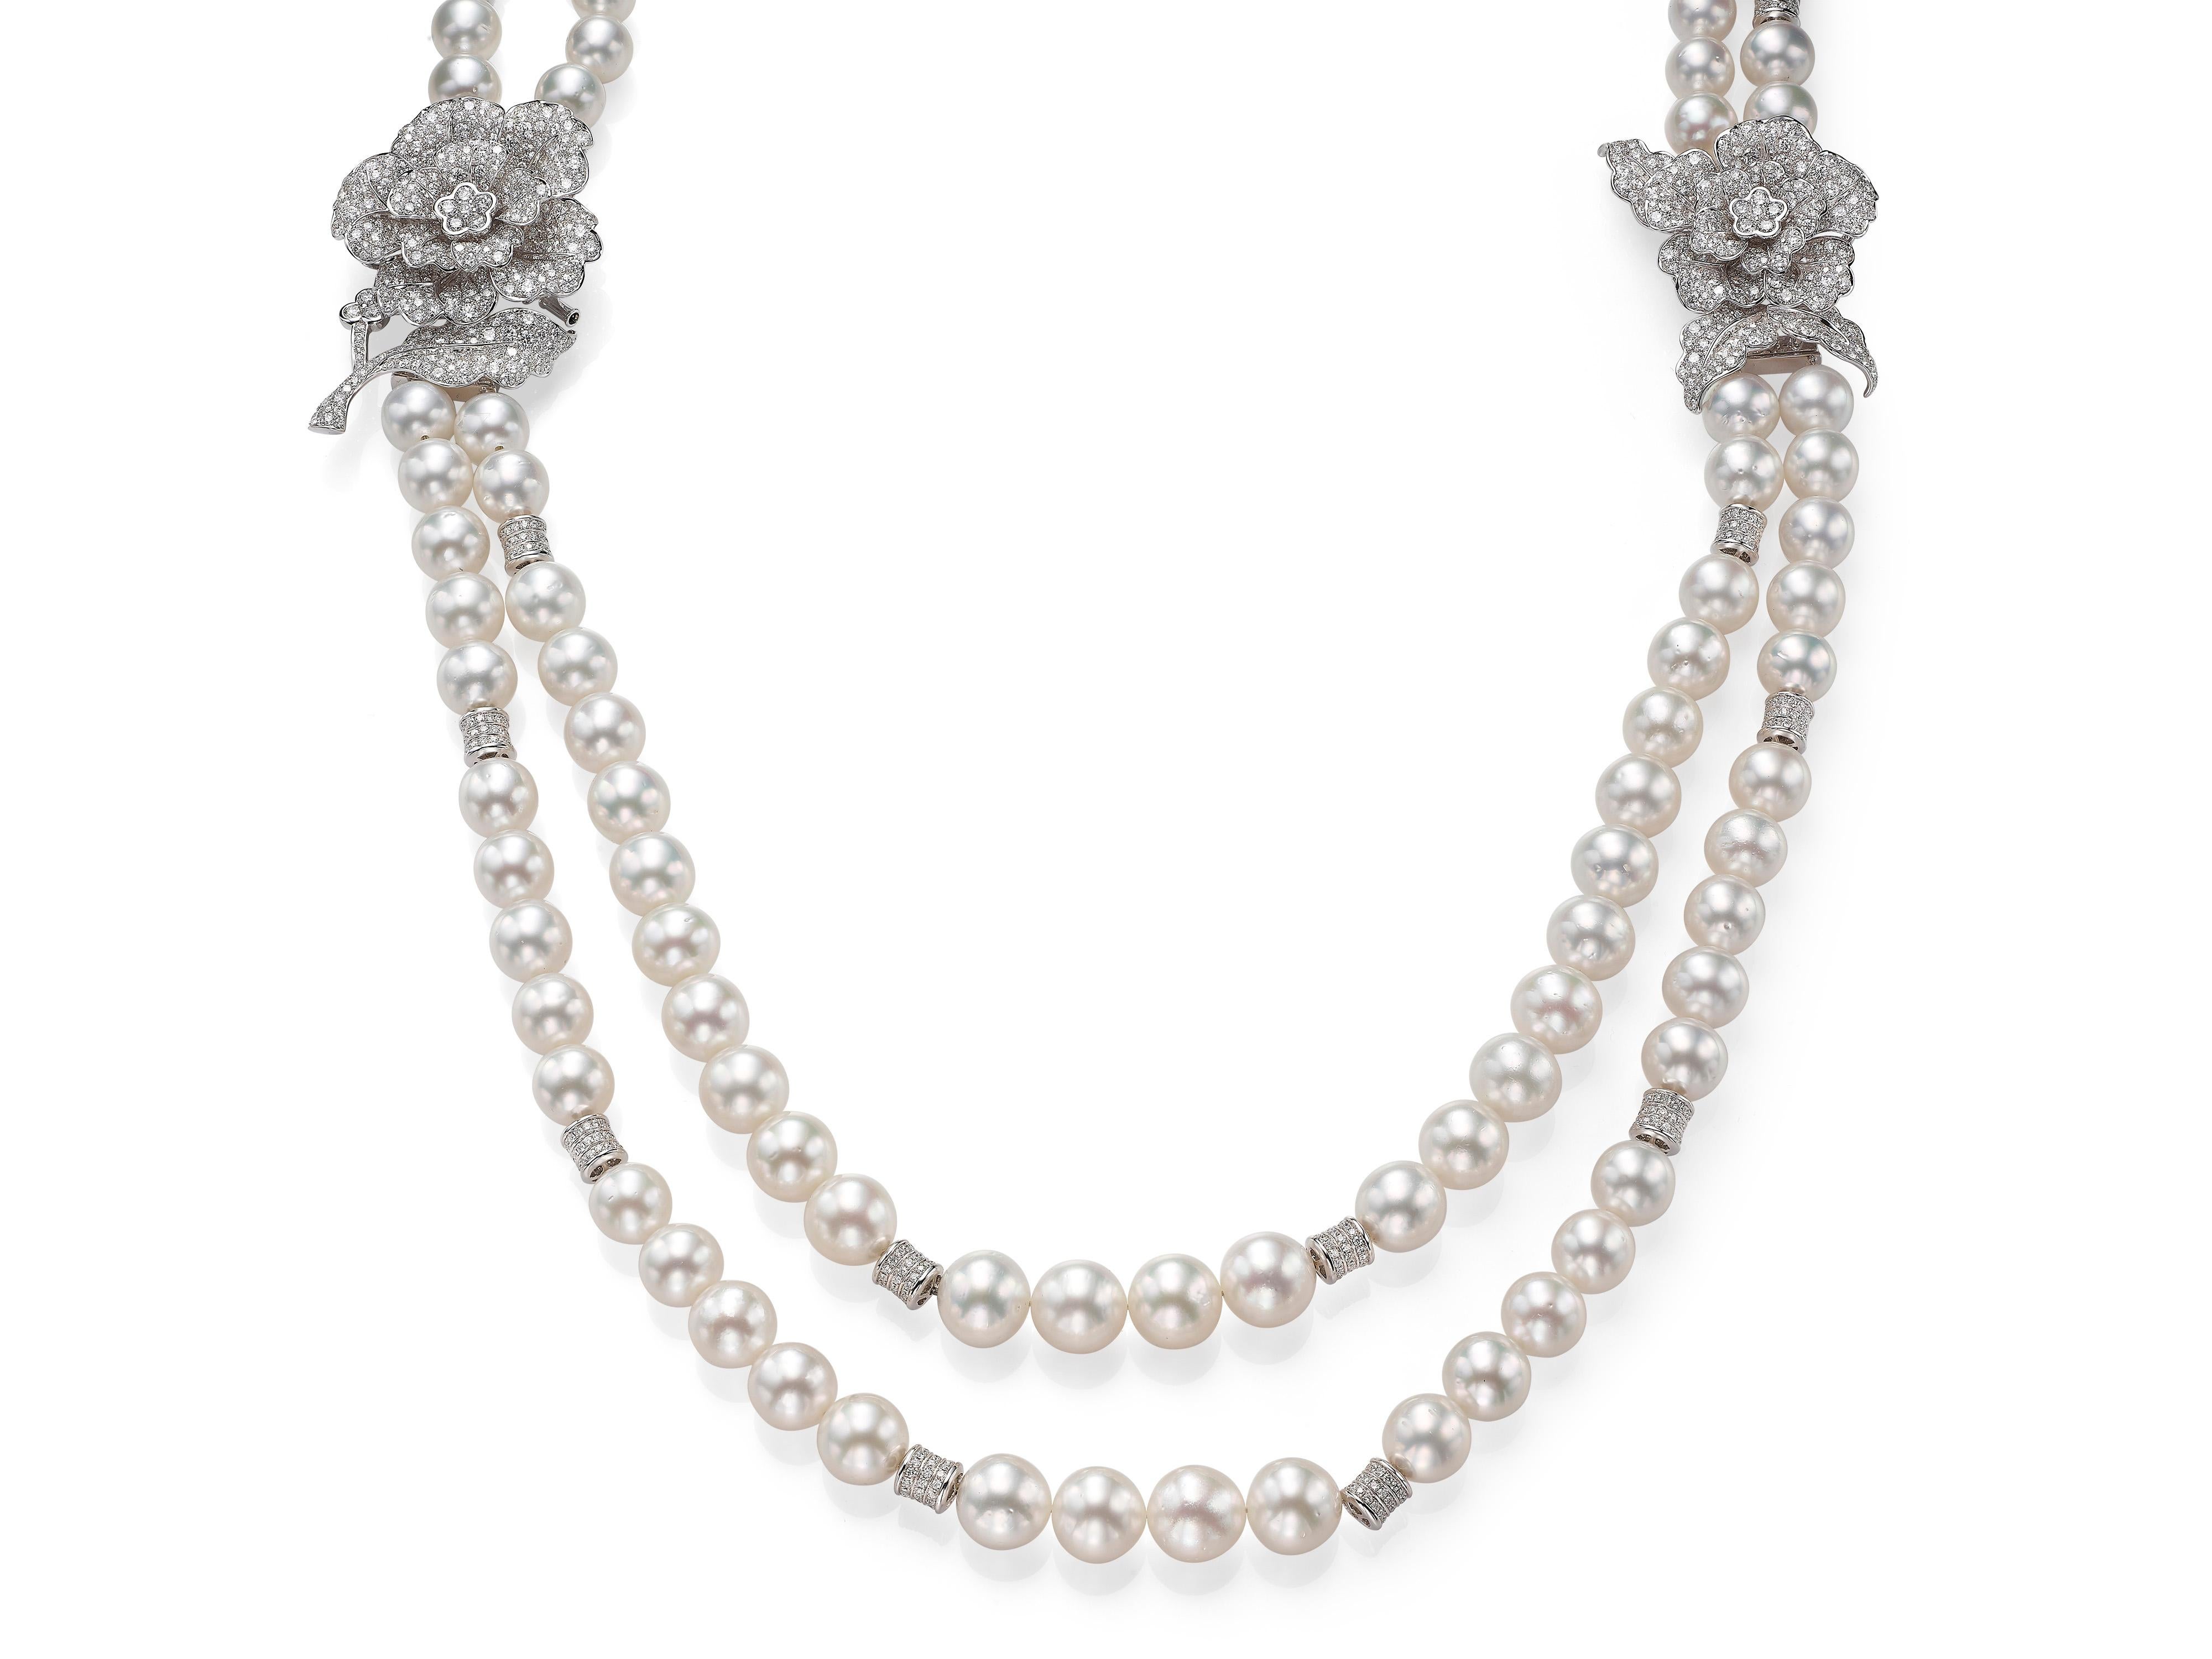 This marvelous Butani necklace exudes opulence and elegance.  Made from two strands of beautiful white South Sea Pearls (graduating from 9-13mm) and accented with two diamond floral pieces that can be detached and worn separately as brooches